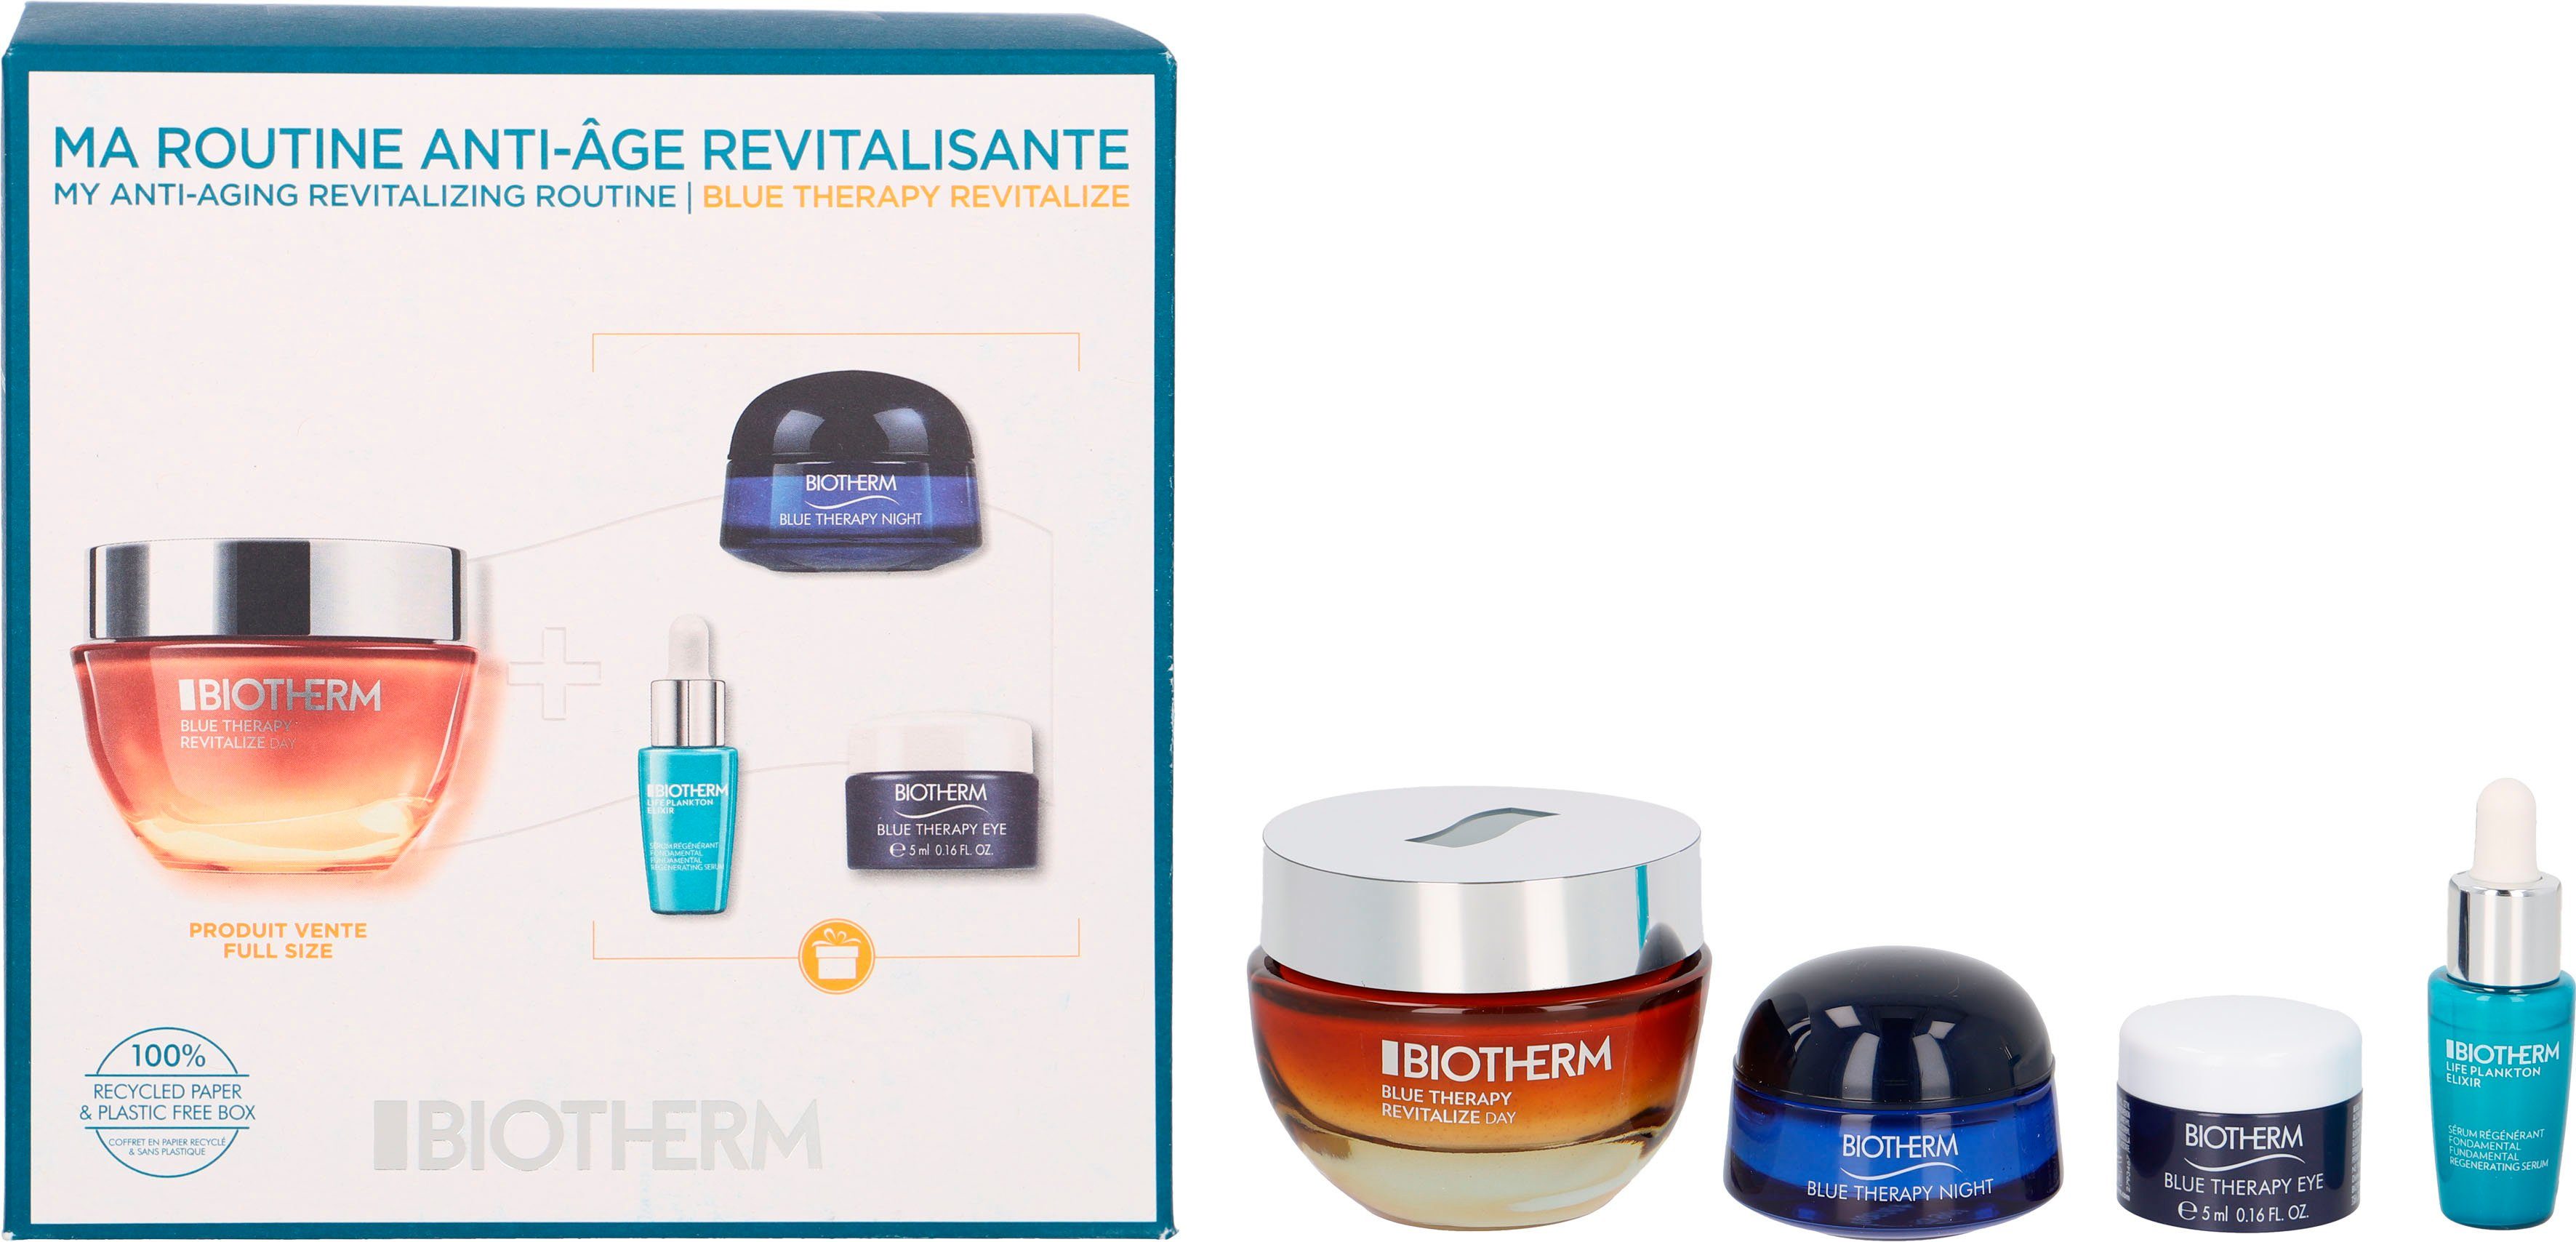 BIOTHERM Gesichtspflege-Set Blue Therapy Revitalize Day Cream Value Set, 4-tlg. | Tagescremes